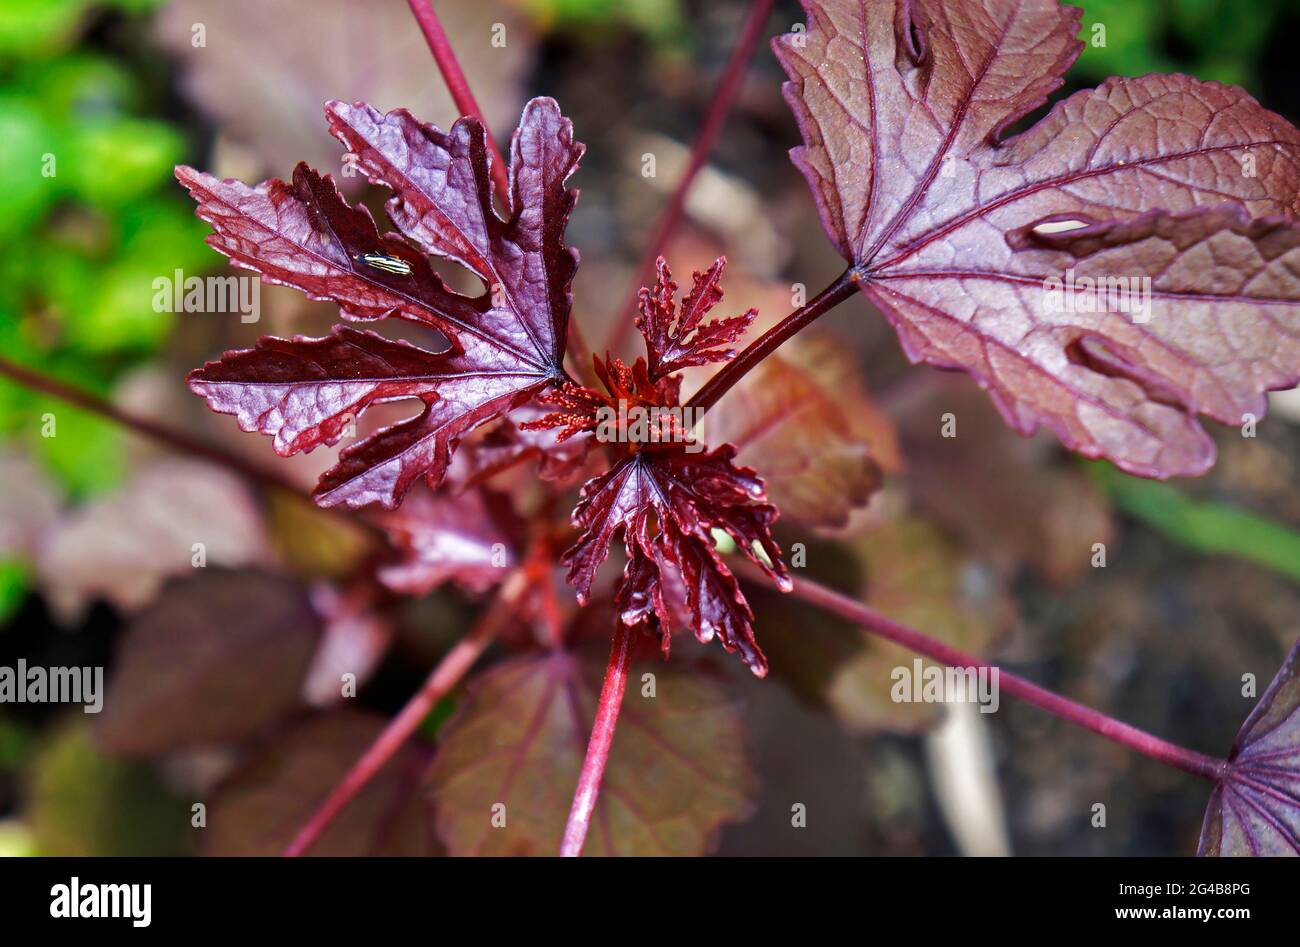 Cranberry hibiscus or African rosemallow (Hibiscus acetosella) on garden Stock Photo